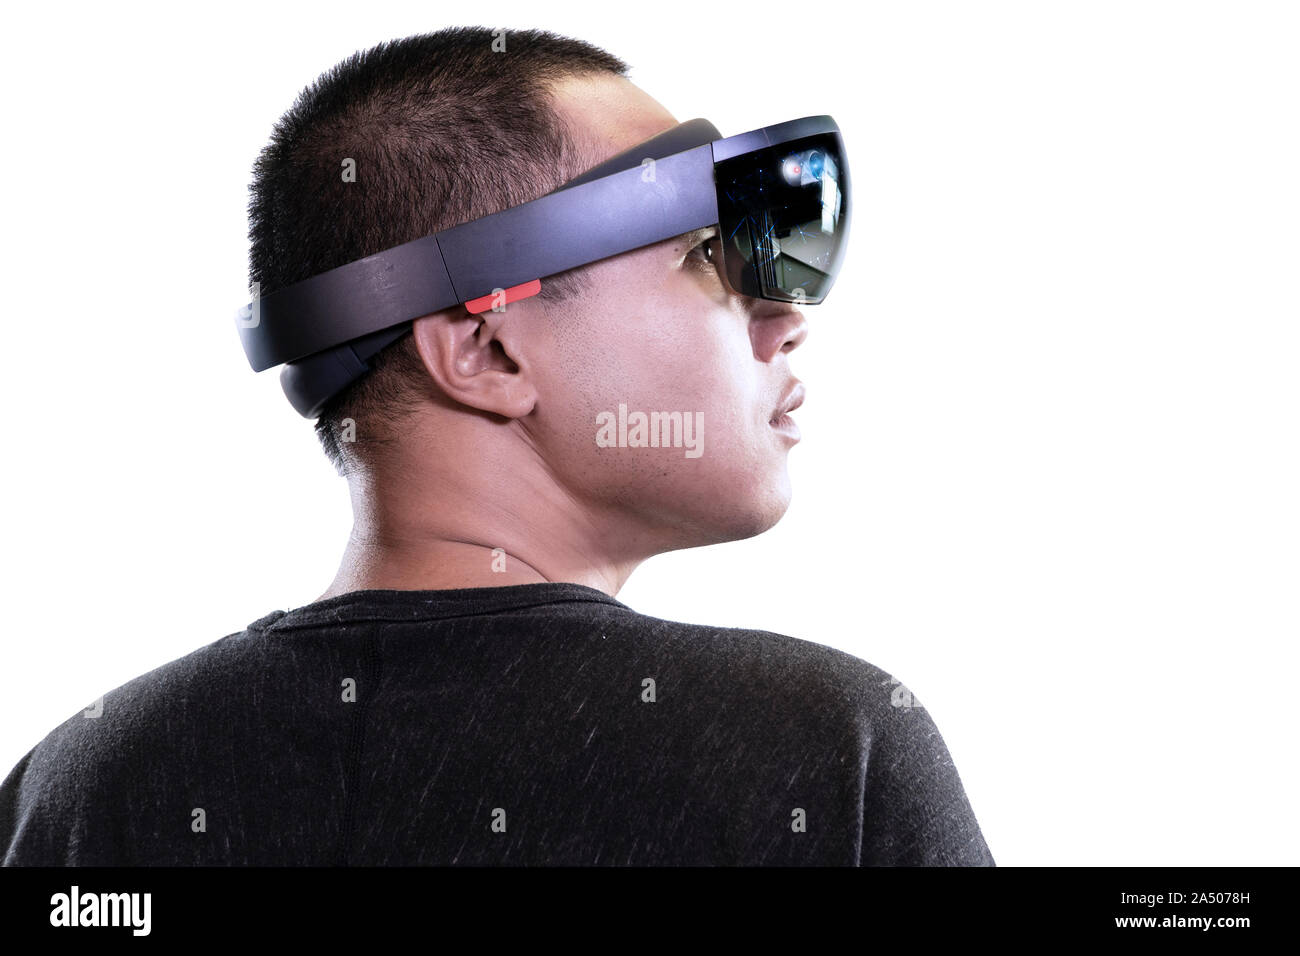 Portrait of man try Mixed reality with HoloLens glasses isolated on white background. Future Technology concept Stock Photo